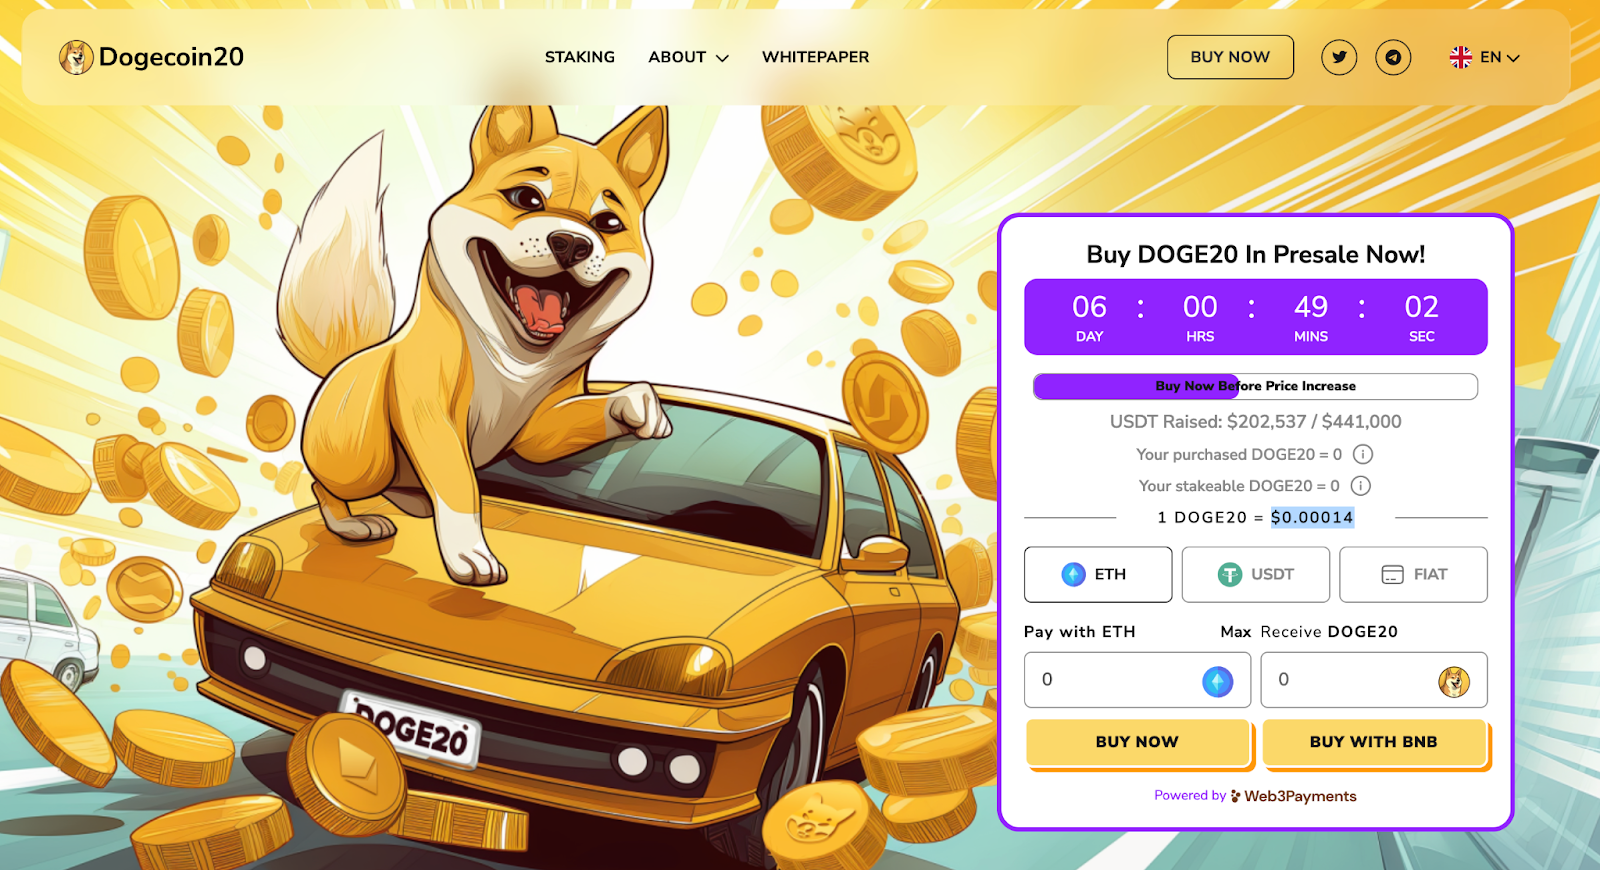 Dogecoin20 ($DOGE20) Token Sale Goes Live - Passive Income Protocol For Dogecoin’s Ultimate Upgrade Raises $200K In Hours